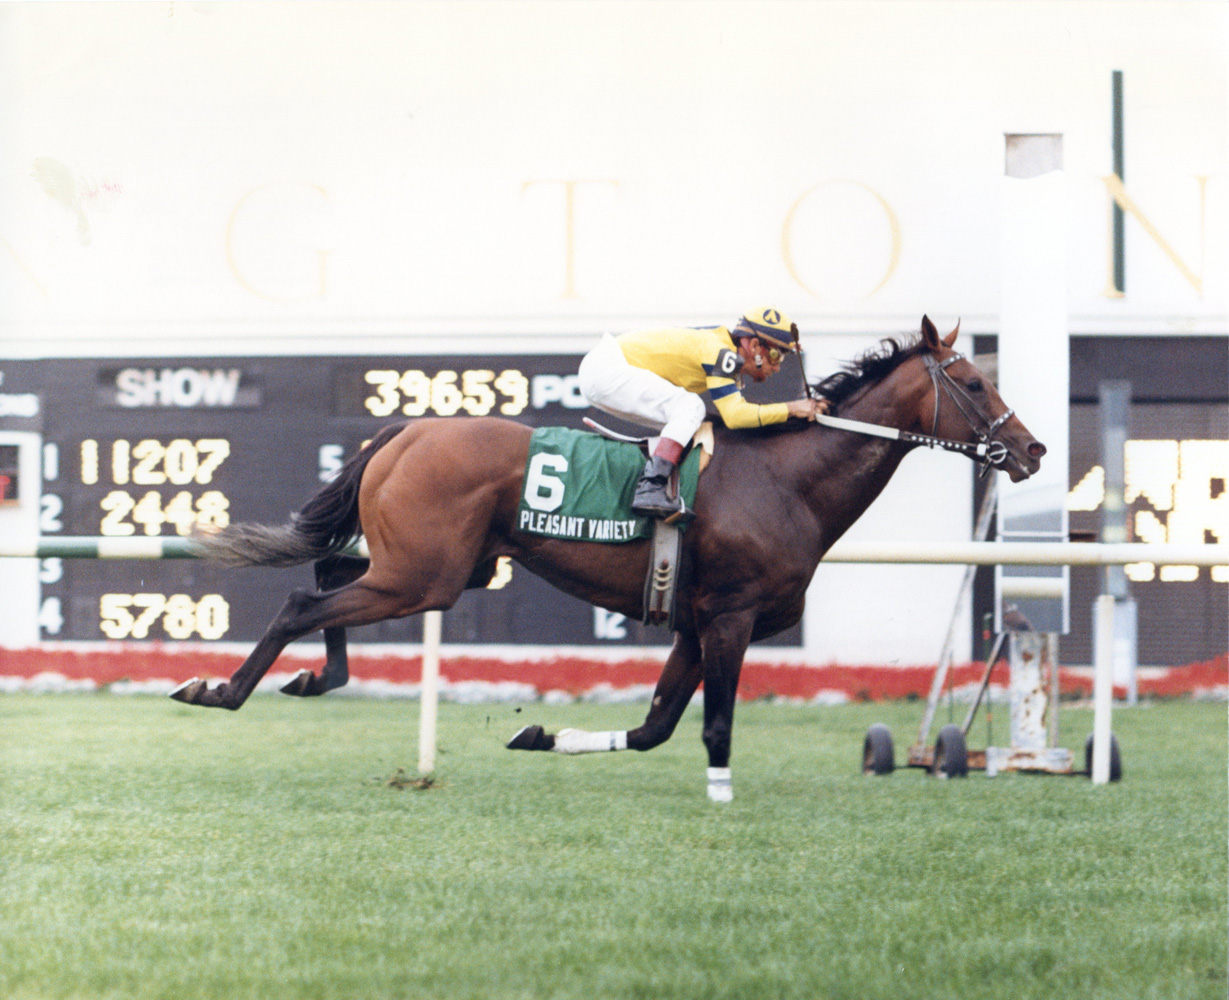 Earlie Fires and Pleasant Variety winning the 1990 Arlington Handicap at Arlington Park (Four Footed Fotos/Museum Collection)